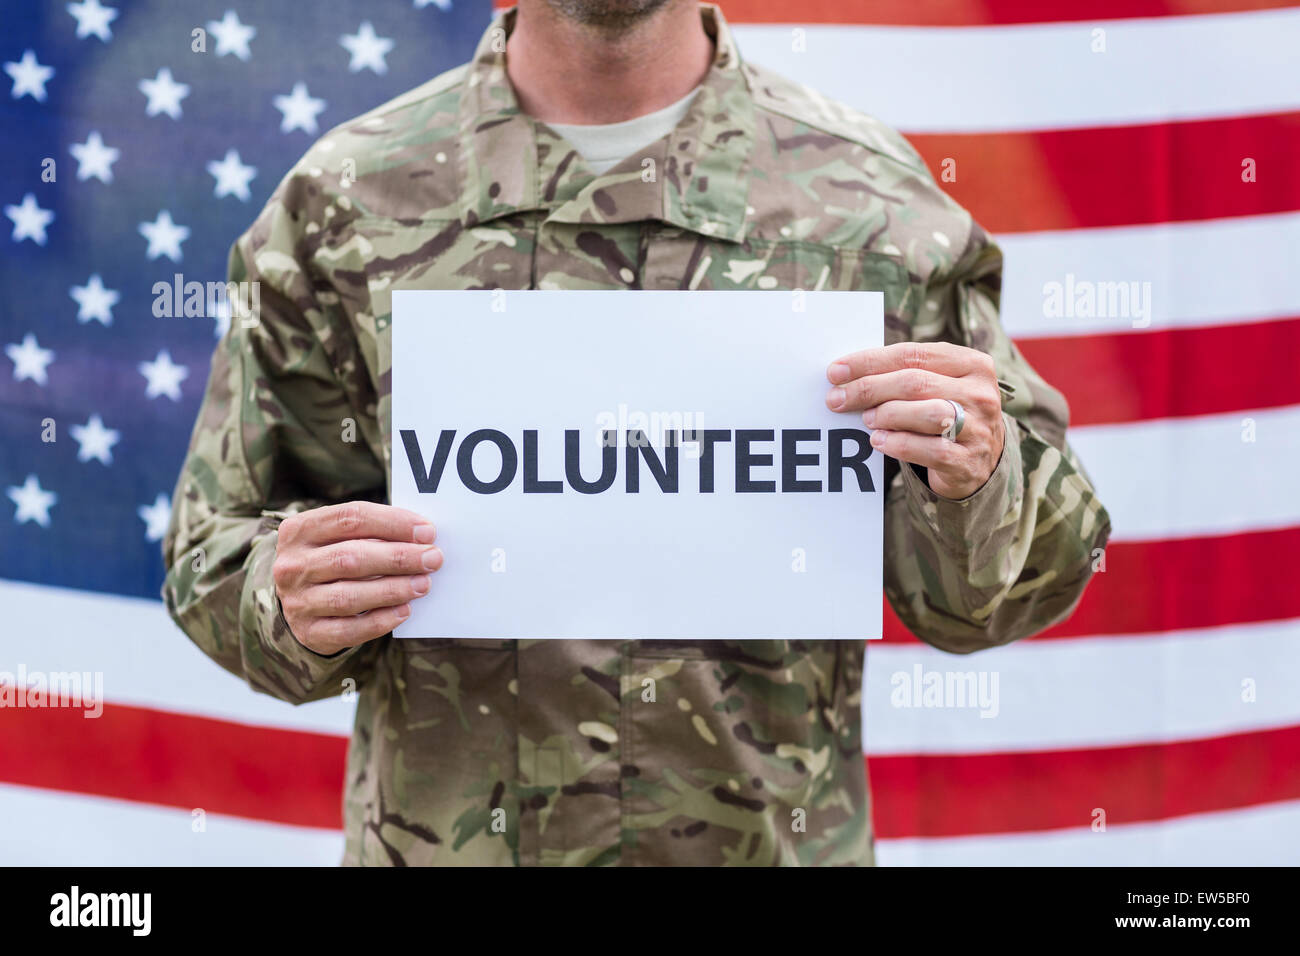 American soldier holding recruitment sign Stock Photo